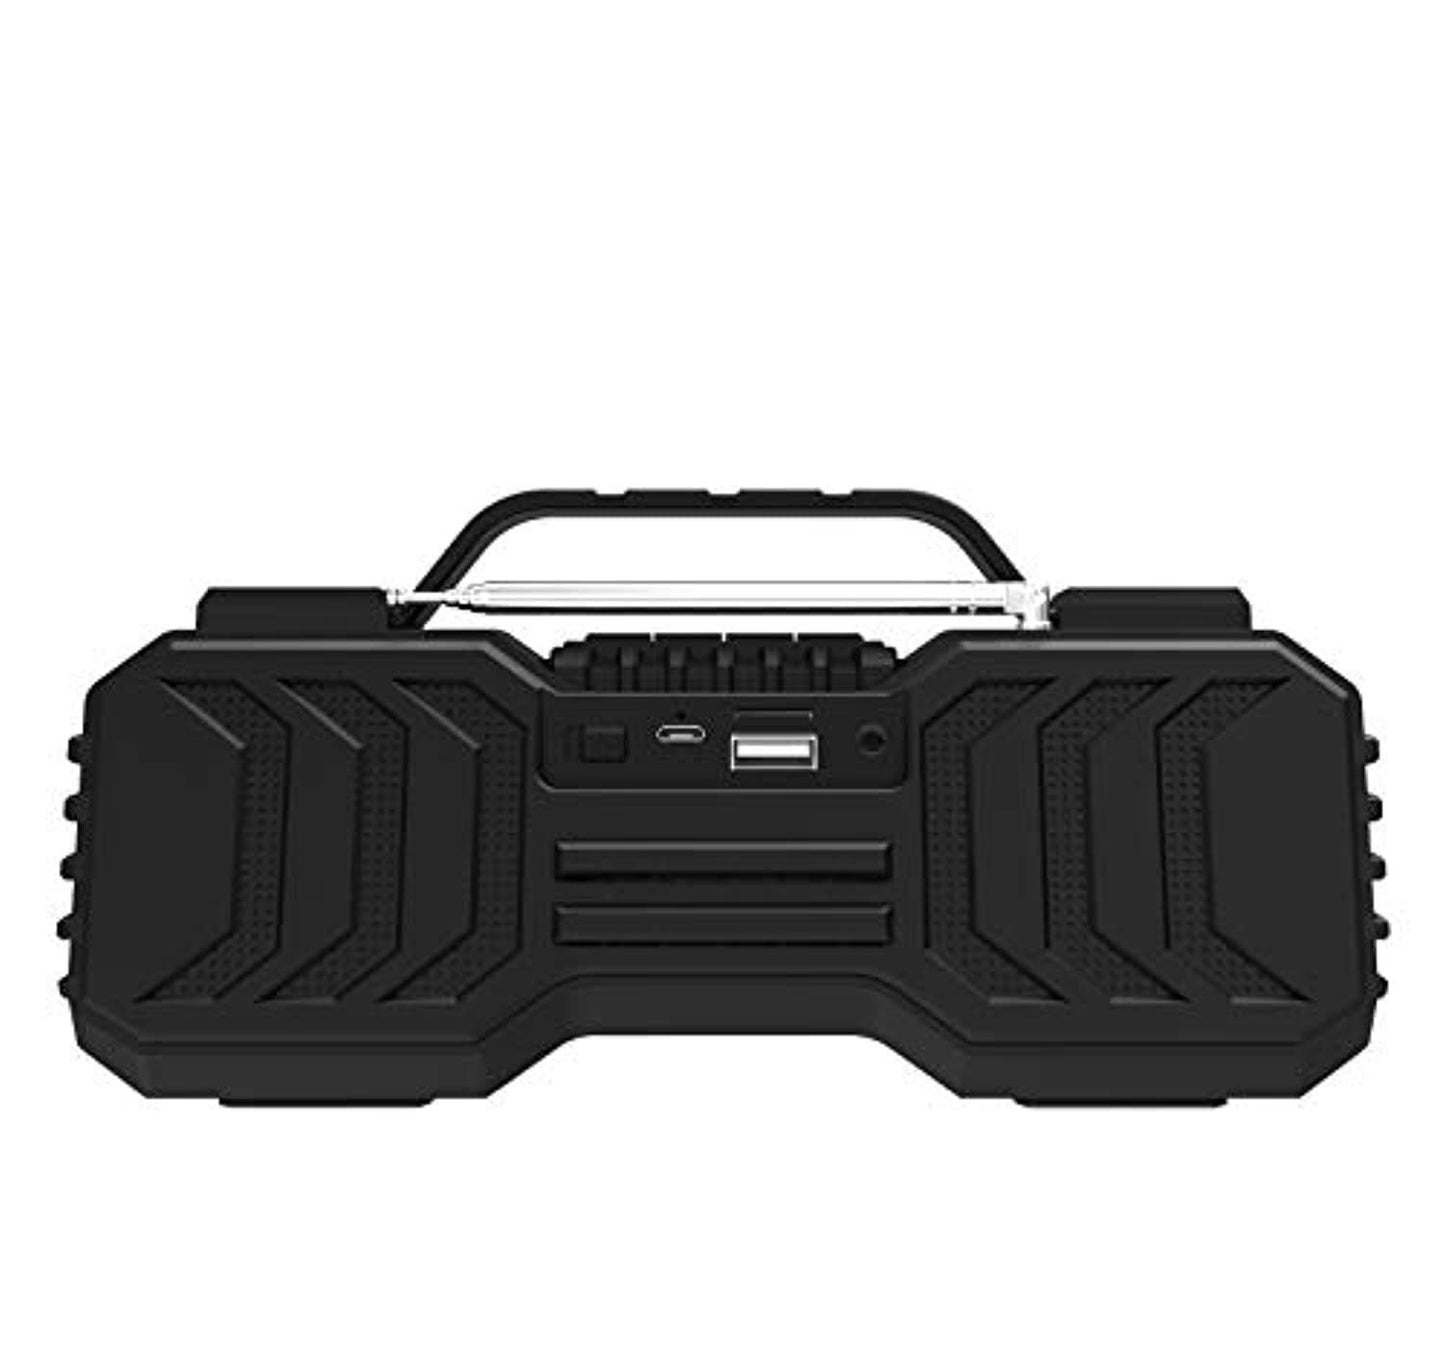 Boombox+ 32W Bluetooth Party Speaker with FM/USB/TF/Display/Handsfree Calling